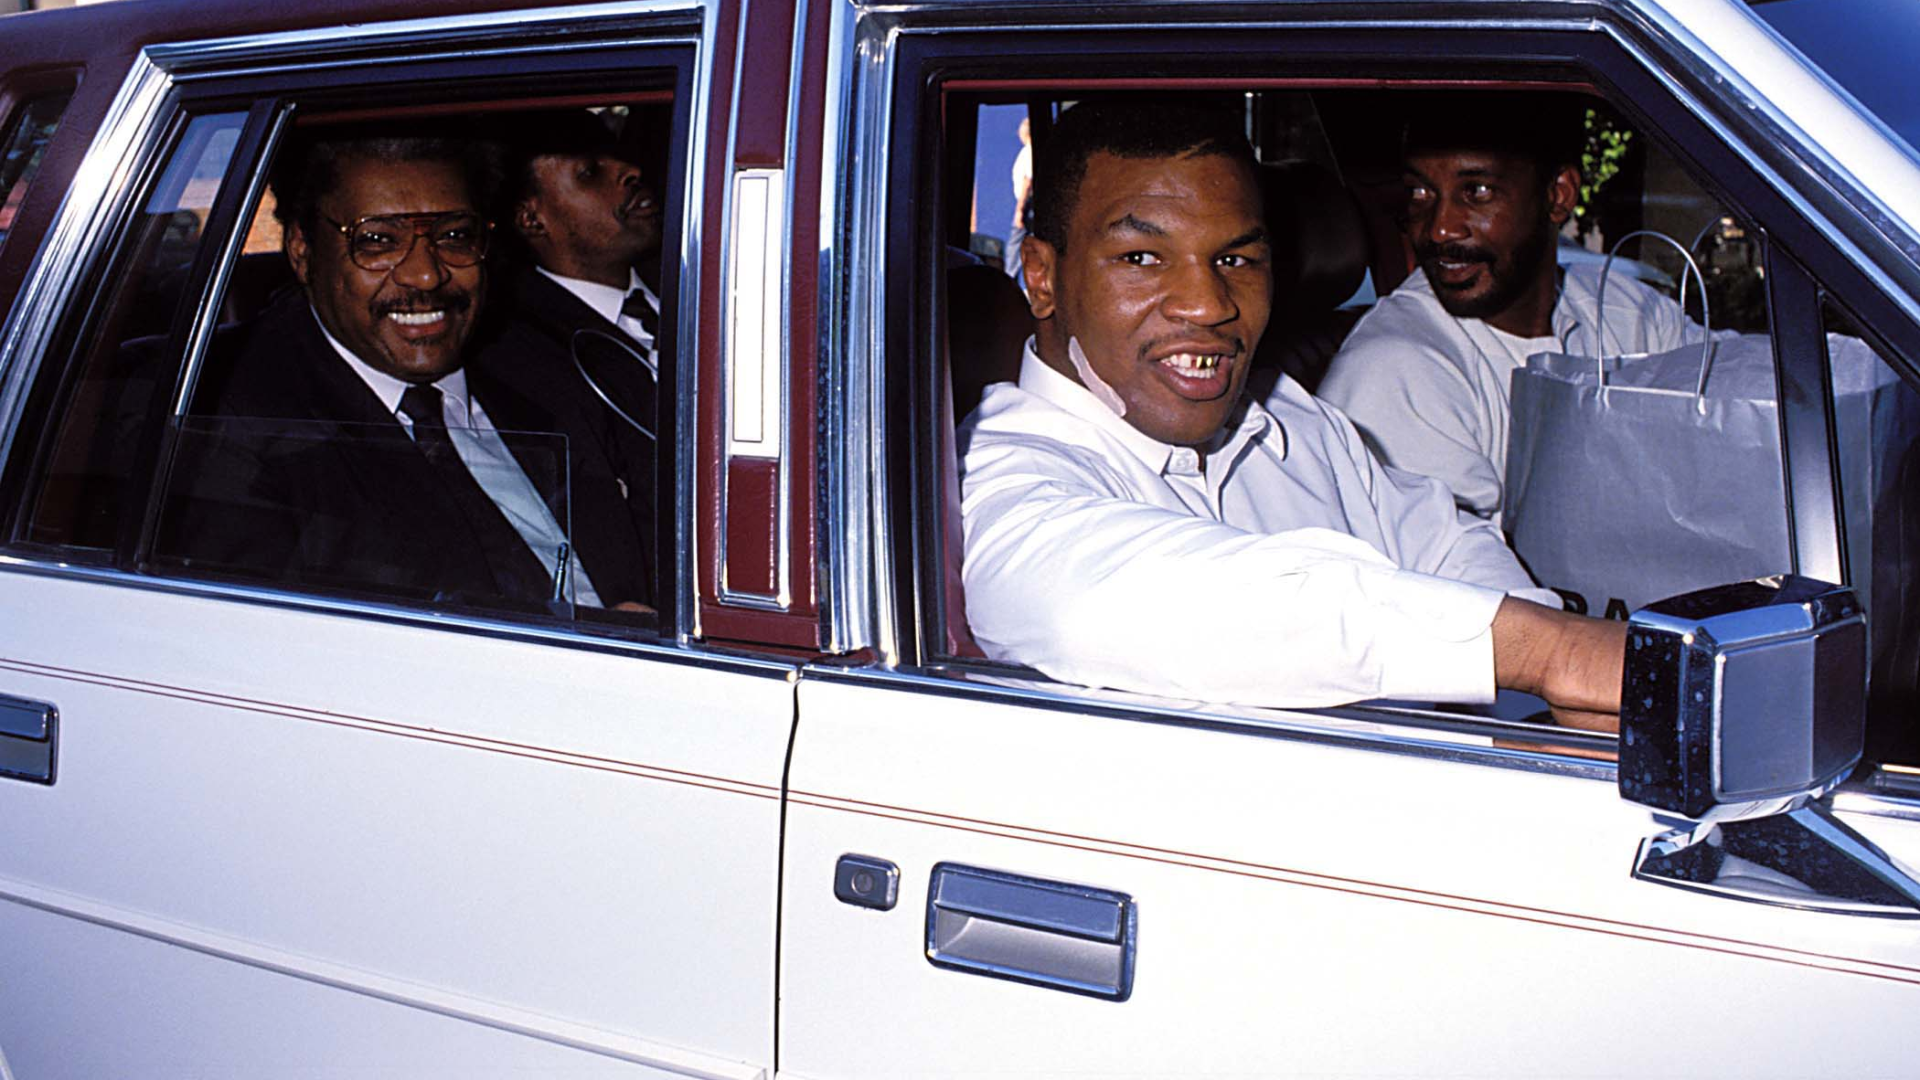 bao mike tyson suddenly revealed that he was given an entire collection dedicated to amir tyson s son and helped his son realize his dream 65200f9ce888e Mike Tyson Suddenly Revealed That He Was Given An Entire Collection Dedicated To Amir Tyson's Son And Helped His Son Realize His Dream.